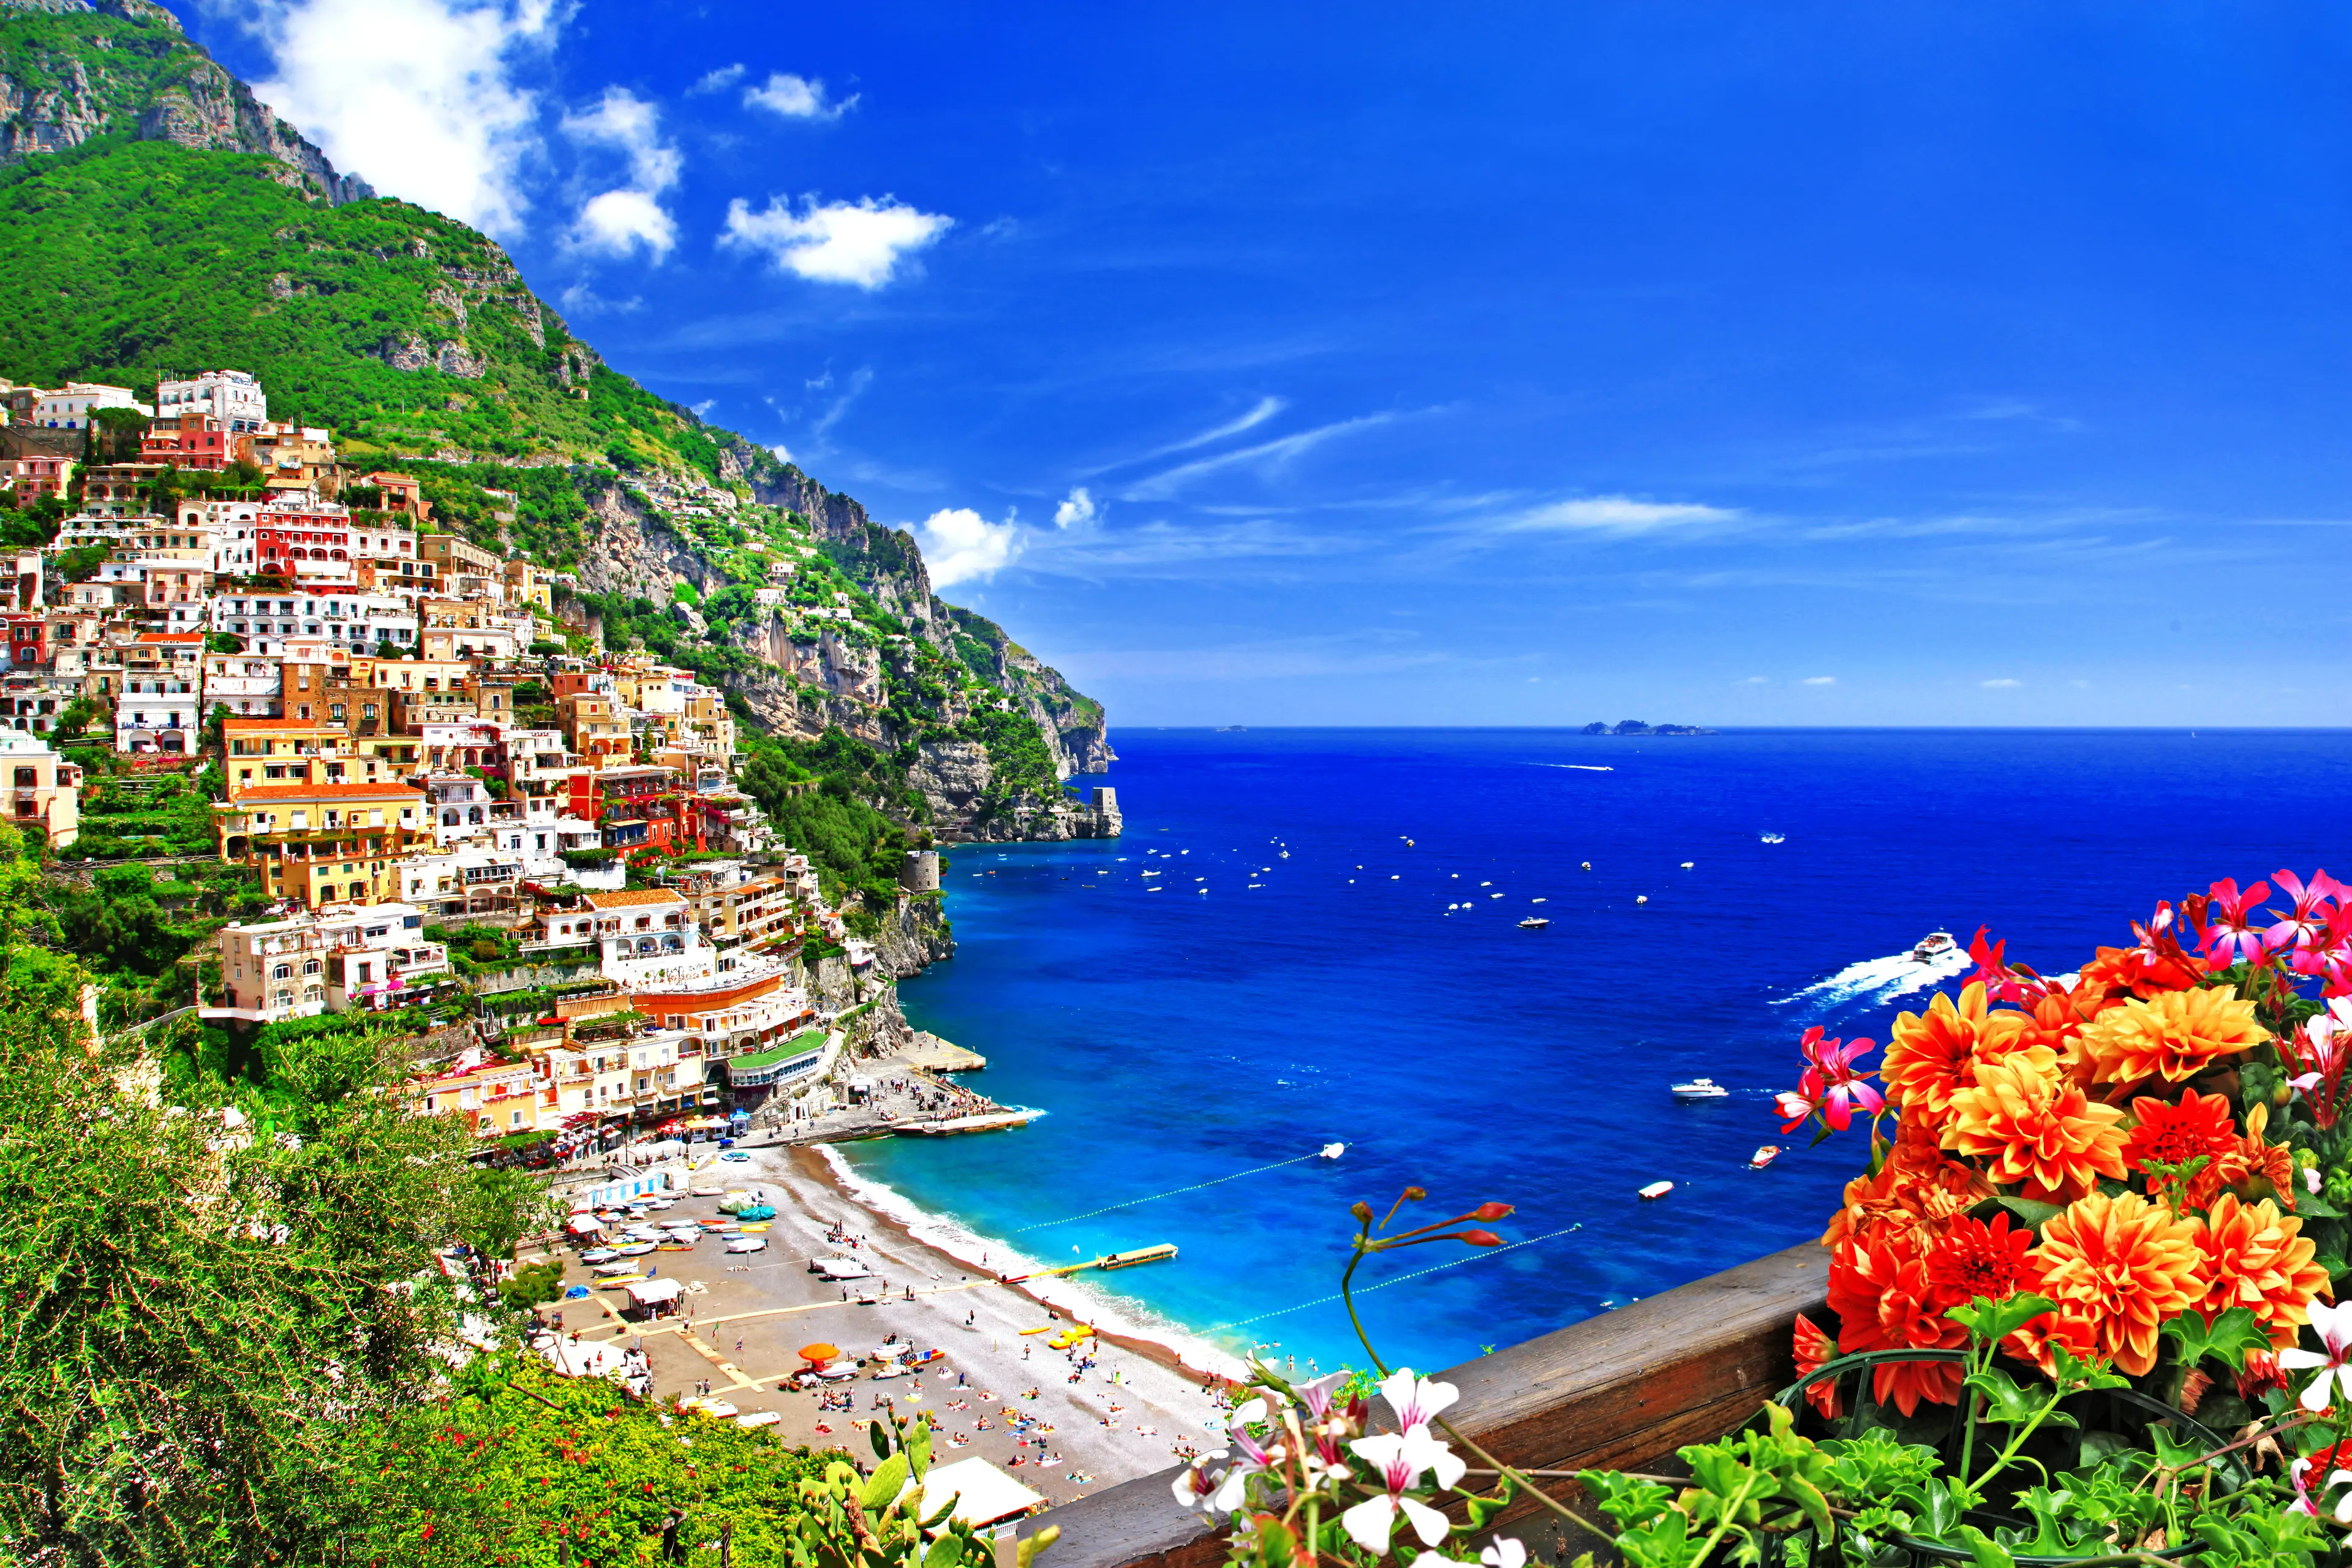 3-Day Local Experience: Amalfi Coast Food, Wine & Nightlife with Friends